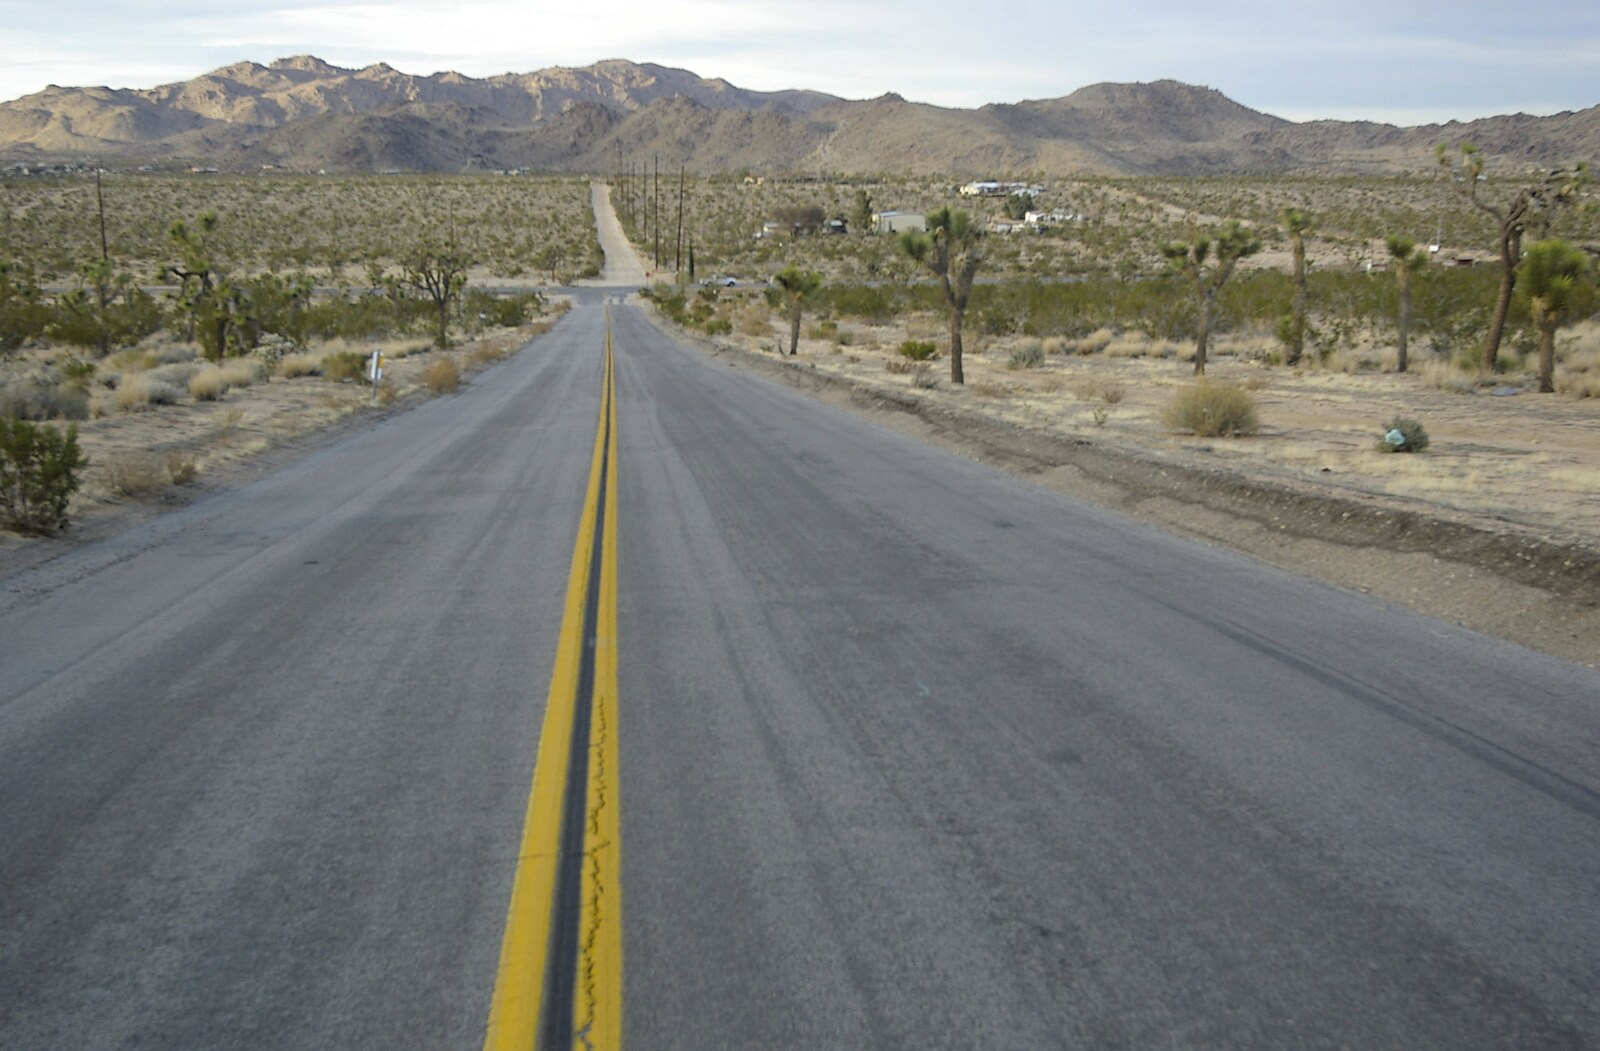 A vanishing-point road from Mojave Desert: San Diego to Joshua Tree and Twentynine Palms, California, US - 5th March 2006